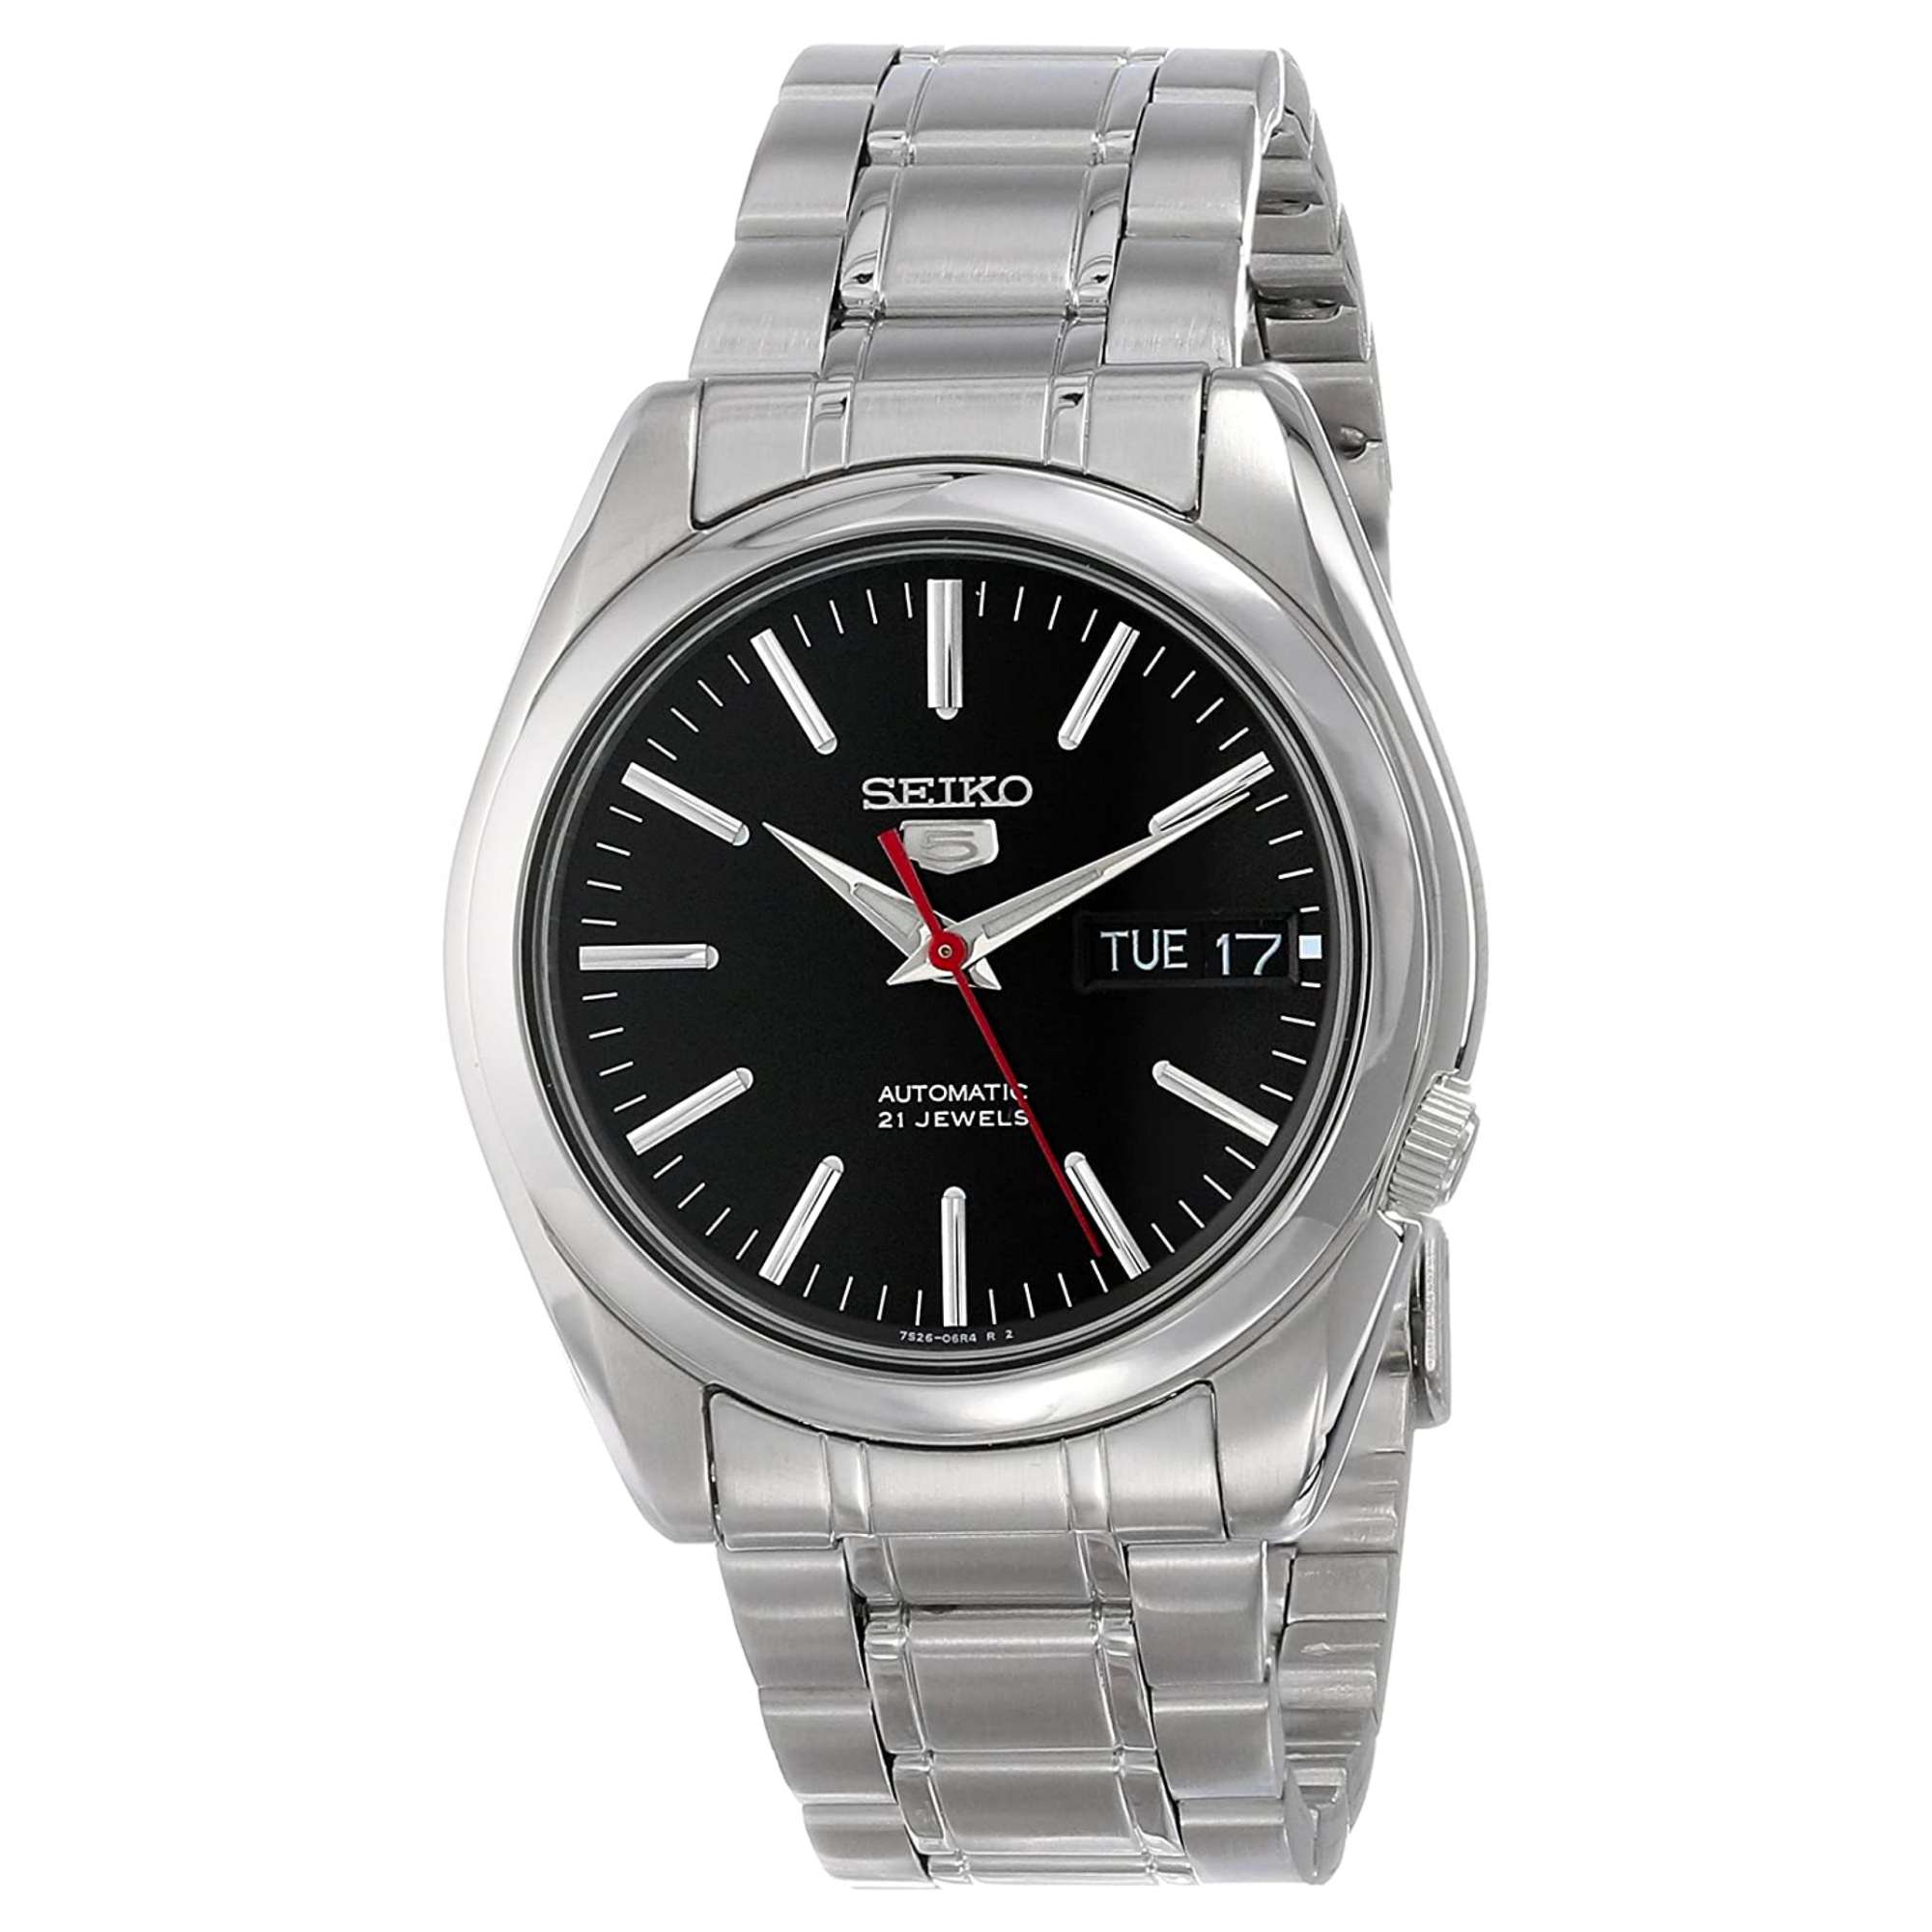 Adelaide reservation Champagne Seiko 5 Automatic Black Dial Stainless Steel Men's Watch SNKL45K1